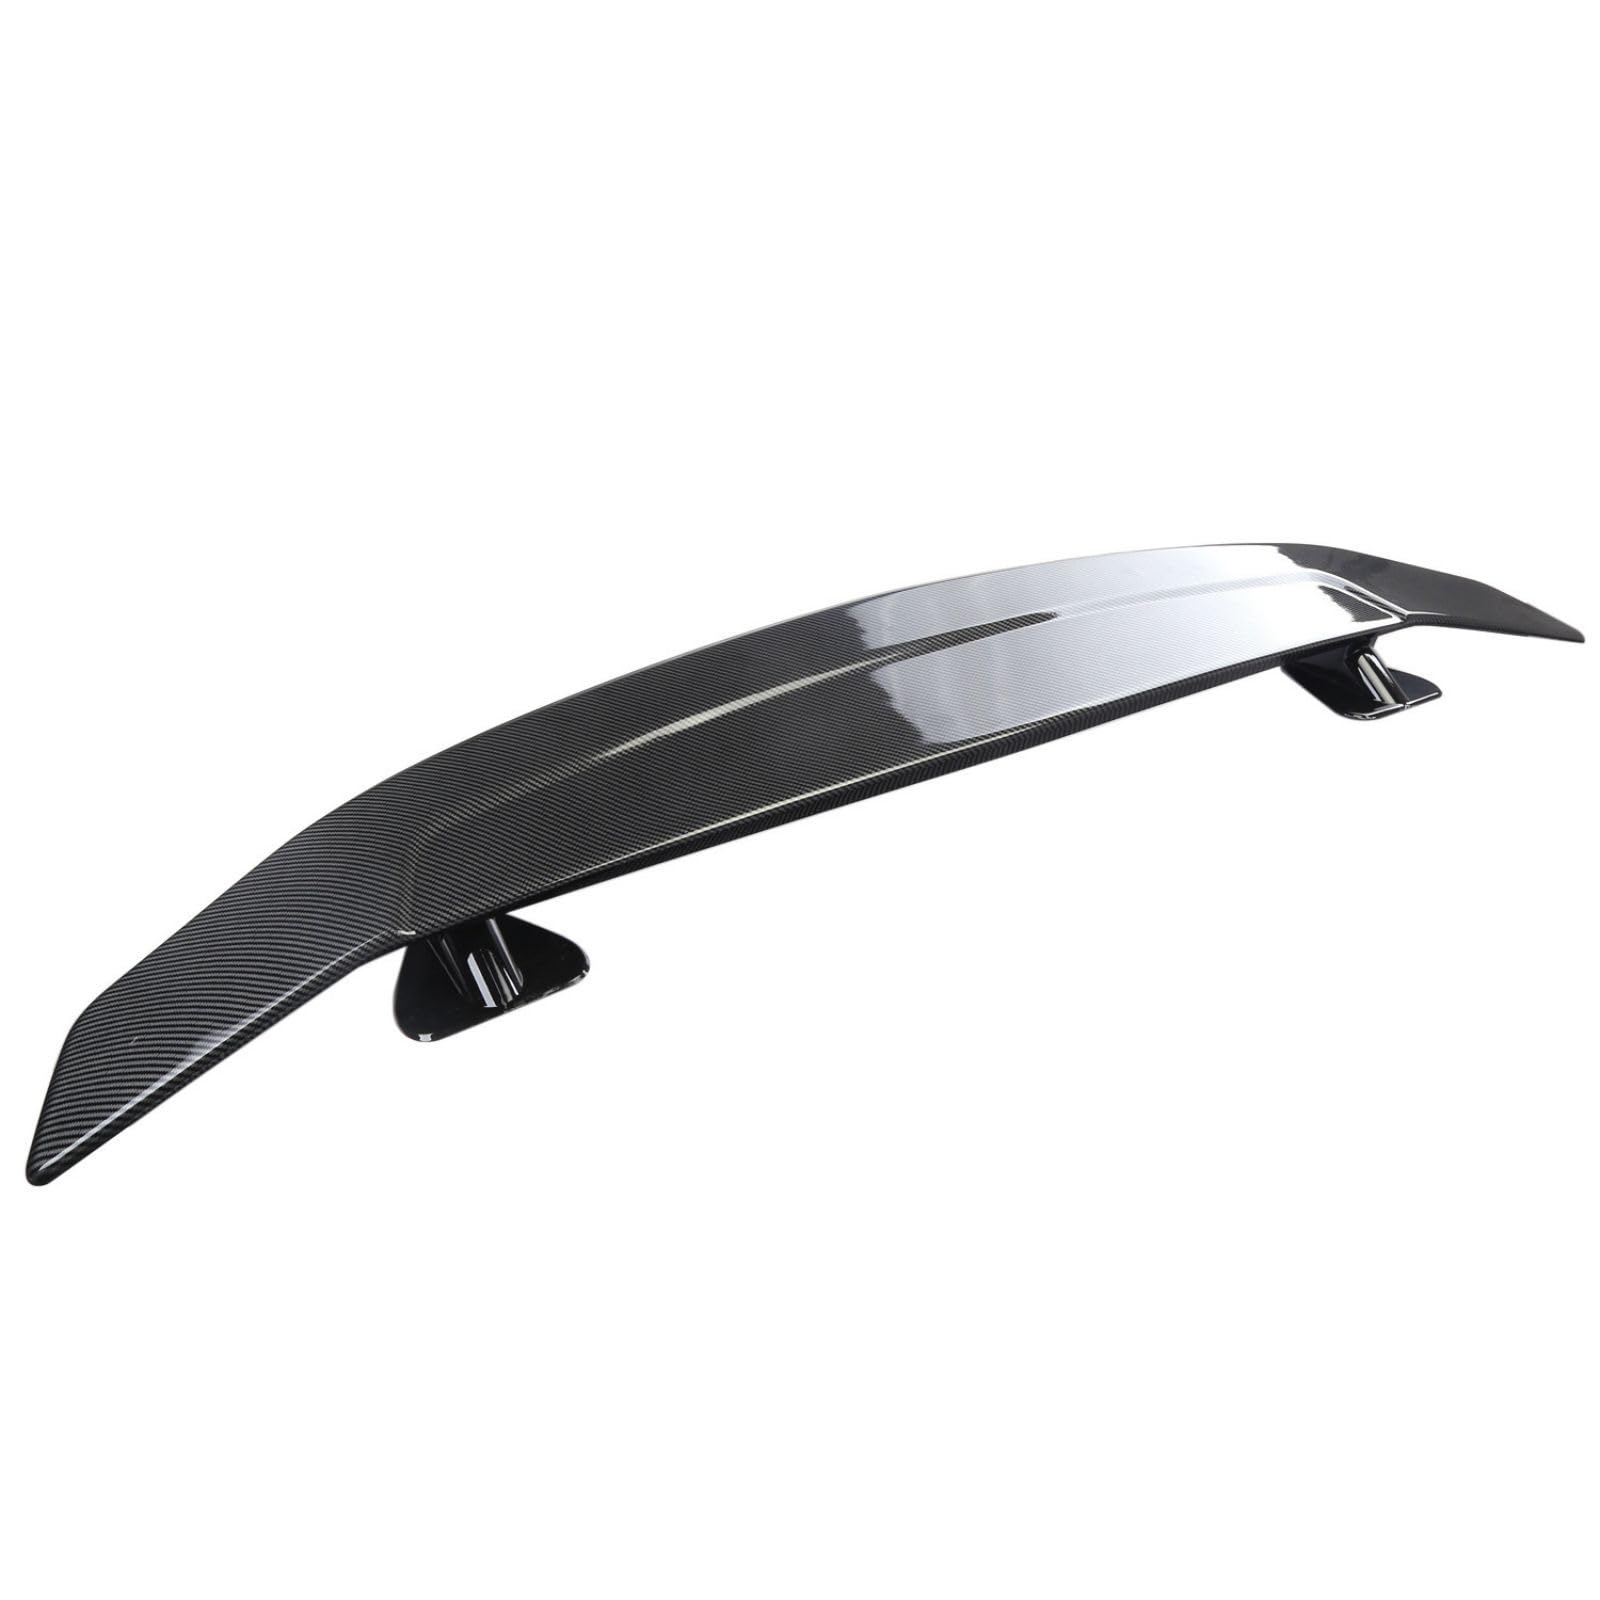 Car Rear Window Spoiler for Toyota Yaris Sedan (USA) (facelift 2019) 2019-2020, without Perforation Lid Spoiler Wings Installation Rear Wing Decoration,Carbon Fiber Color von EESWCSZZ3